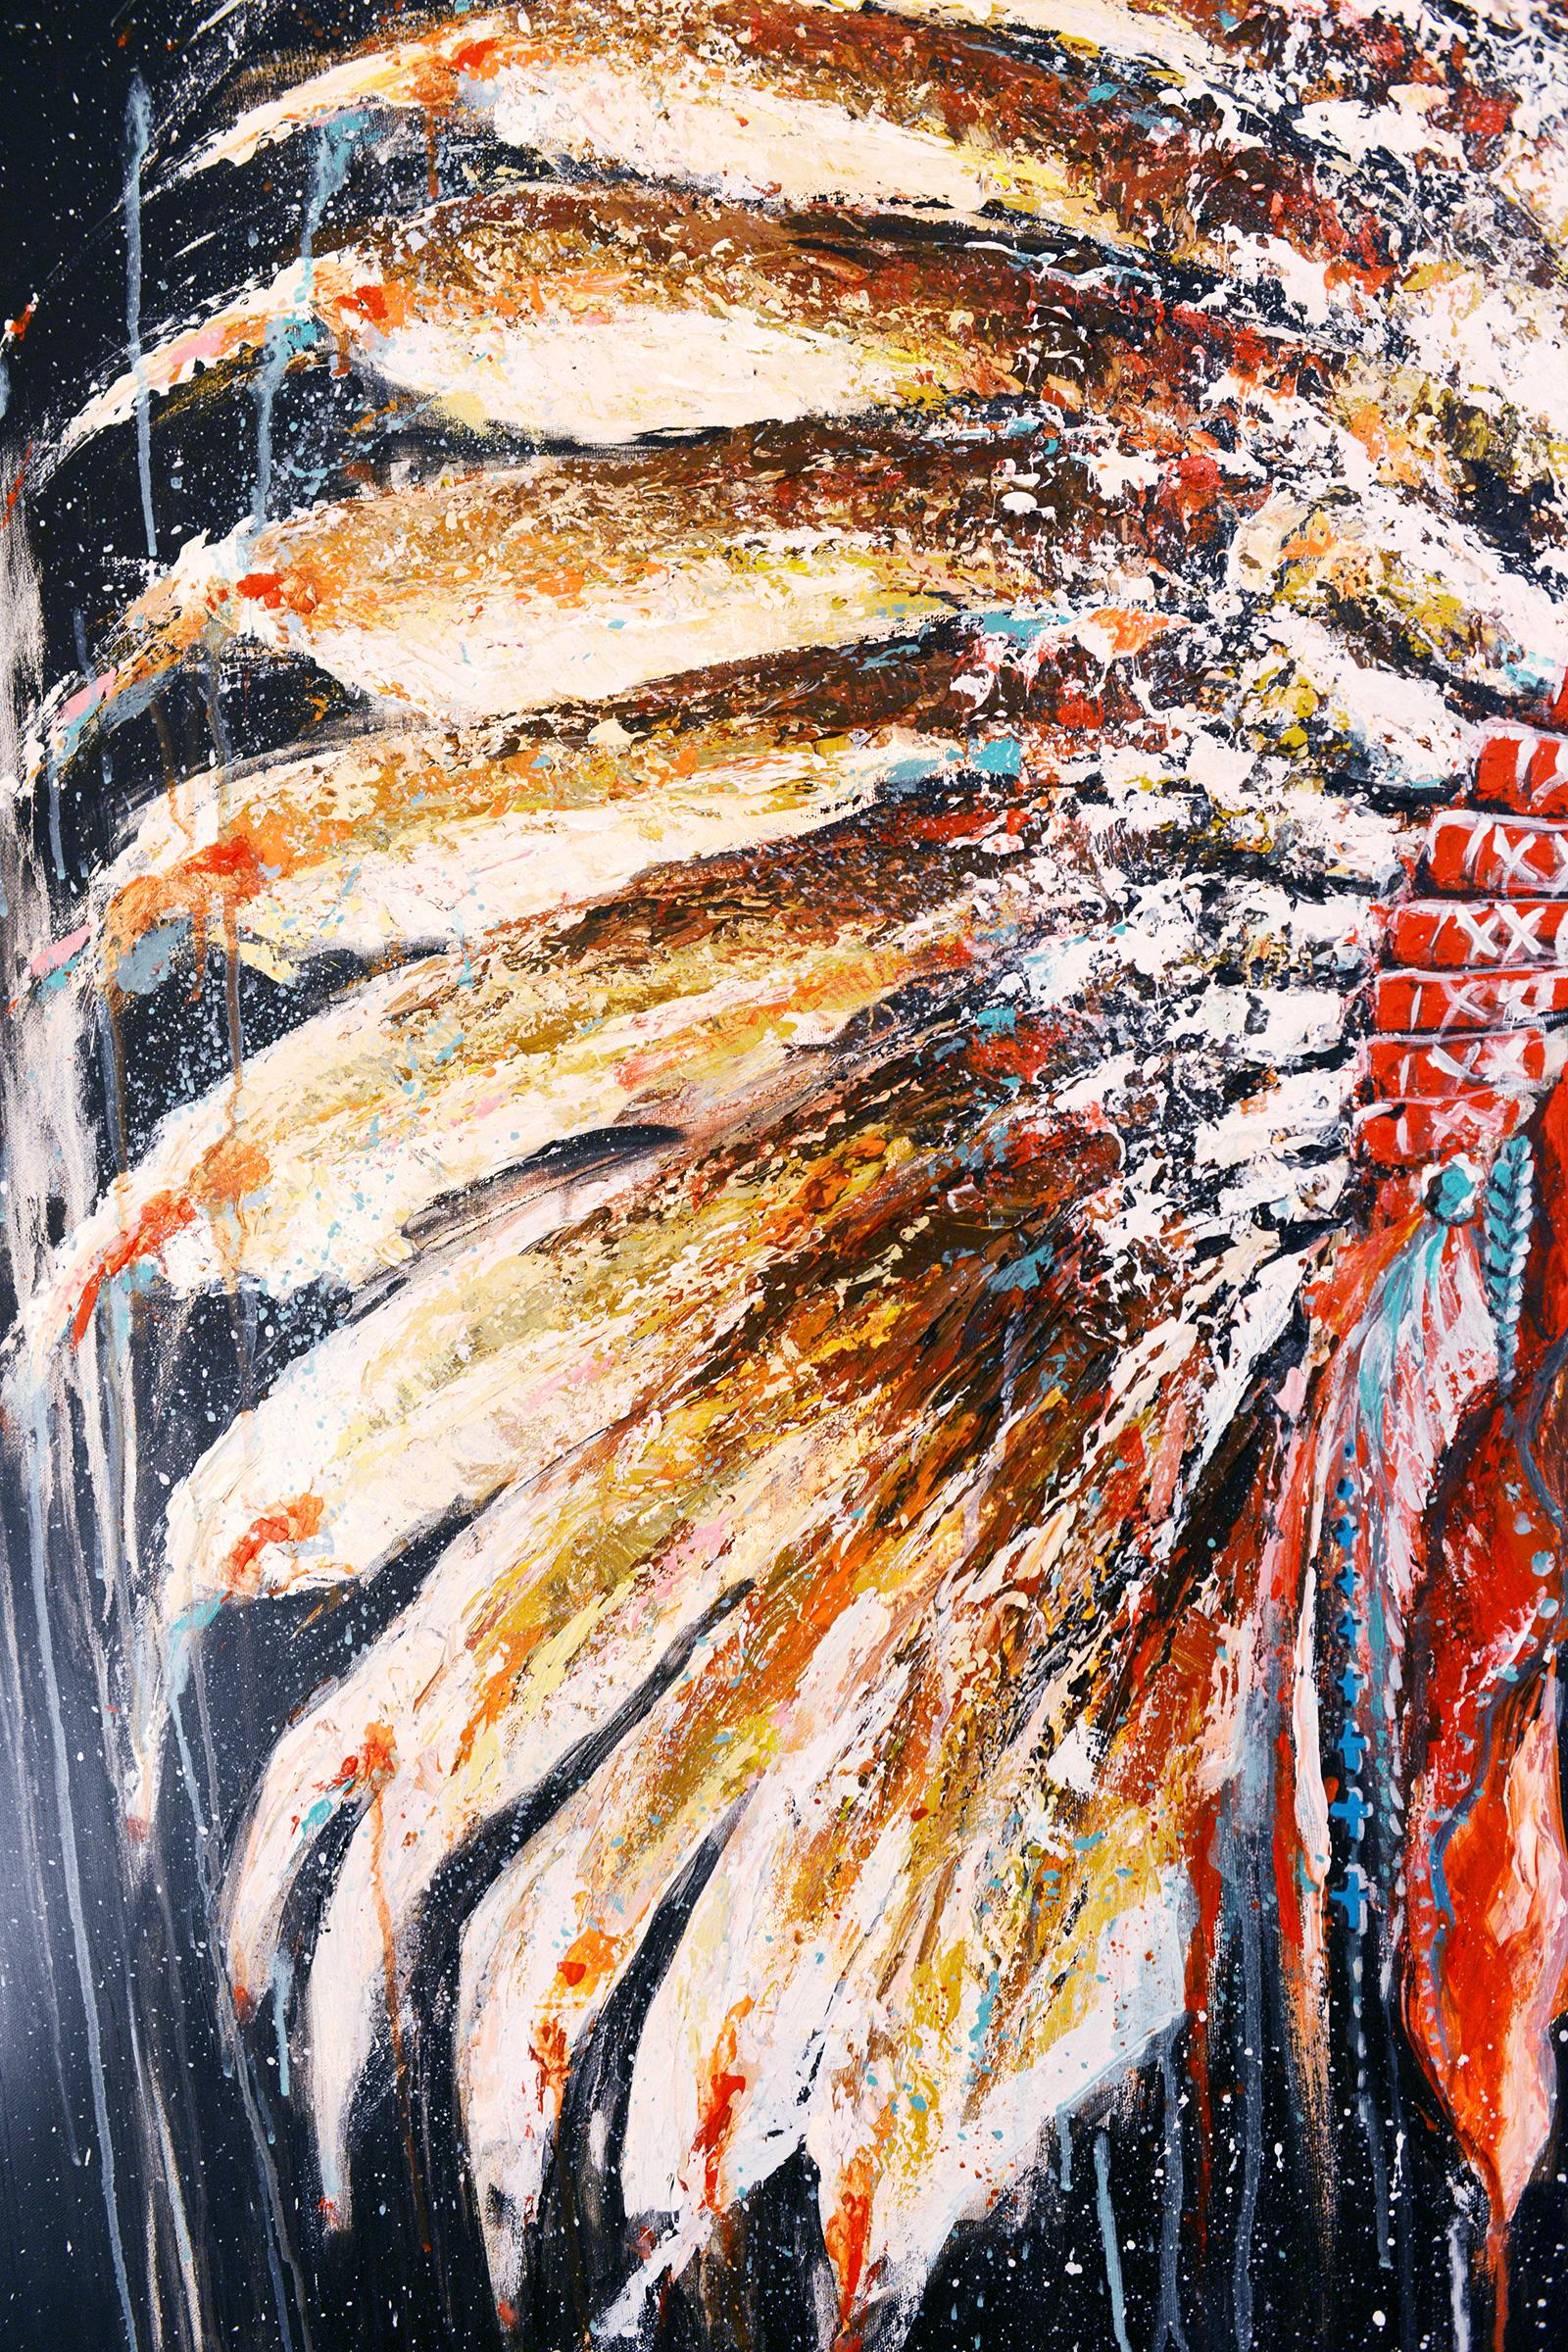 English Headdress Painting For Sale